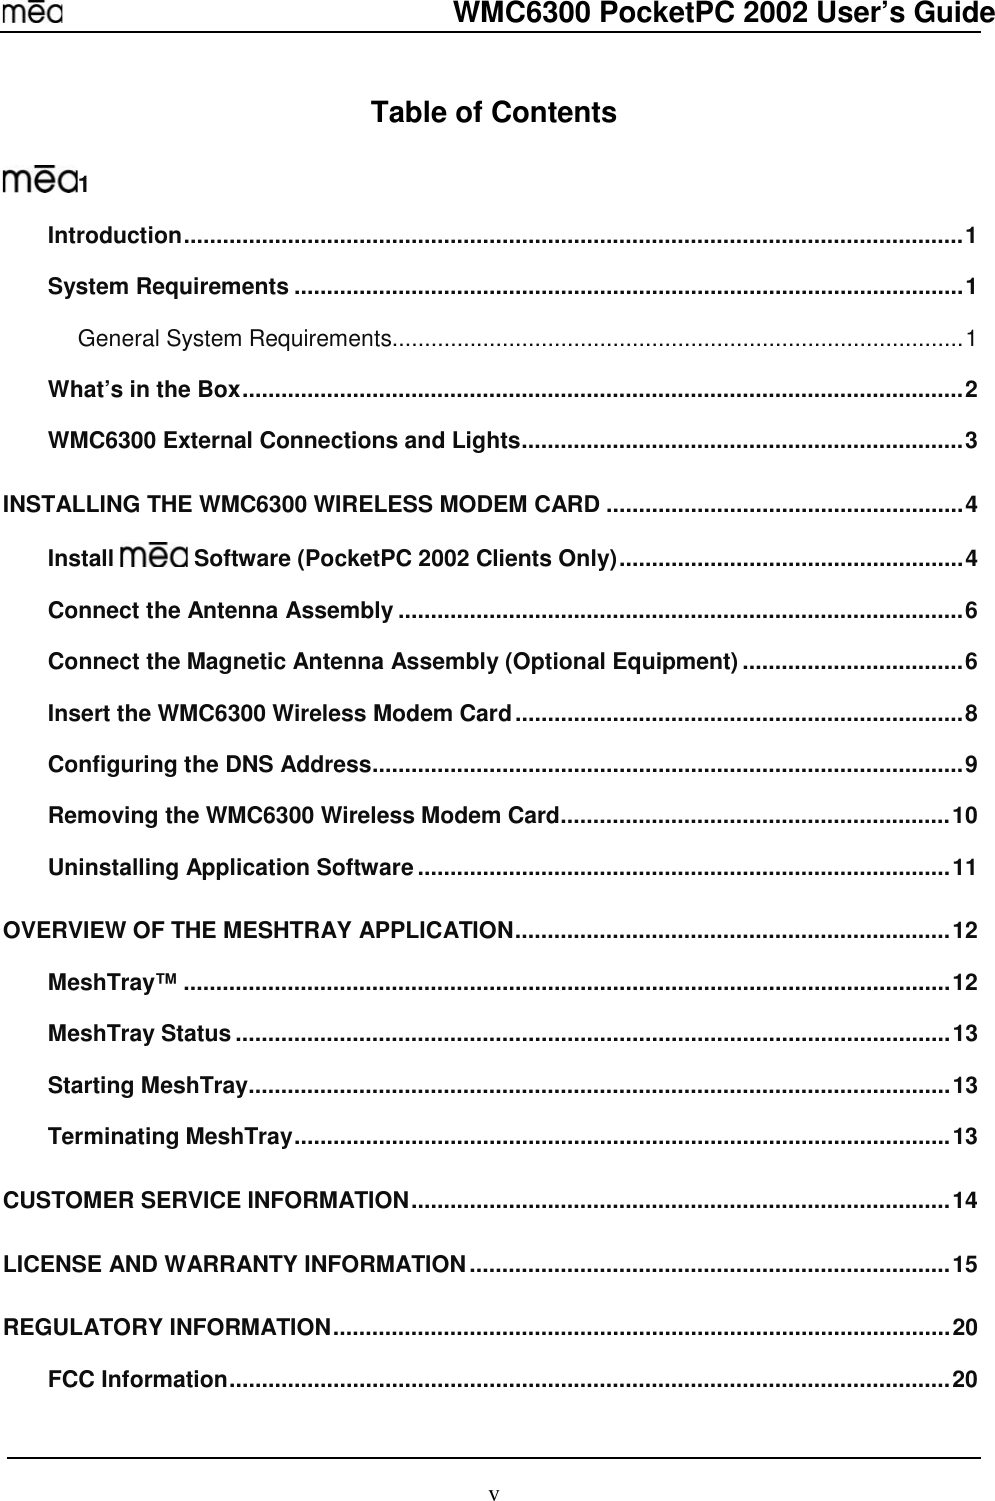  WMC6300 PocketPC 2002 User’s Guide v Table of Contents  1 Introduction........................................................................................................................1 System Requirements .......................................................................................................1 General System Requirements........................................................................................1 What’s in the Box...............................................................................................................2 WMC6300 External Connections and Lights....................................................................3 INSTALLING THE WMC6300 WIRELESS MODEM CARD .......................................................4 Install   Software (PocketPC 2002 Clients Only).....................................................4 Connect the Antenna Assembly .......................................................................................6 Connect the Magnetic Antenna Assembly (Optional Equipment) ..................................6 Insert the WMC6300 Wireless Modem Card.....................................................................8 Configuring the DNS Address...........................................................................................9 Removing the WMC6300 Wireless Modem Card............................................................10 Uninstalling Application Software..................................................................................11 OVERVIEW OF THE MESHTRAY APPLICATION...................................................................12 MeshTray™ ......................................................................................................................12 MeshTray Status..............................................................................................................13 Starting MeshTray............................................................................................................13 Terminating MeshTray.....................................................................................................13 CUSTOMER SERVICE INFORMATION...................................................................................14 LICENSE AND WARRANTY INFORMATION..........................................................................15 REGULATORY INFORMATION...............................................................................................20 FCC Information...............................................................................................................20 